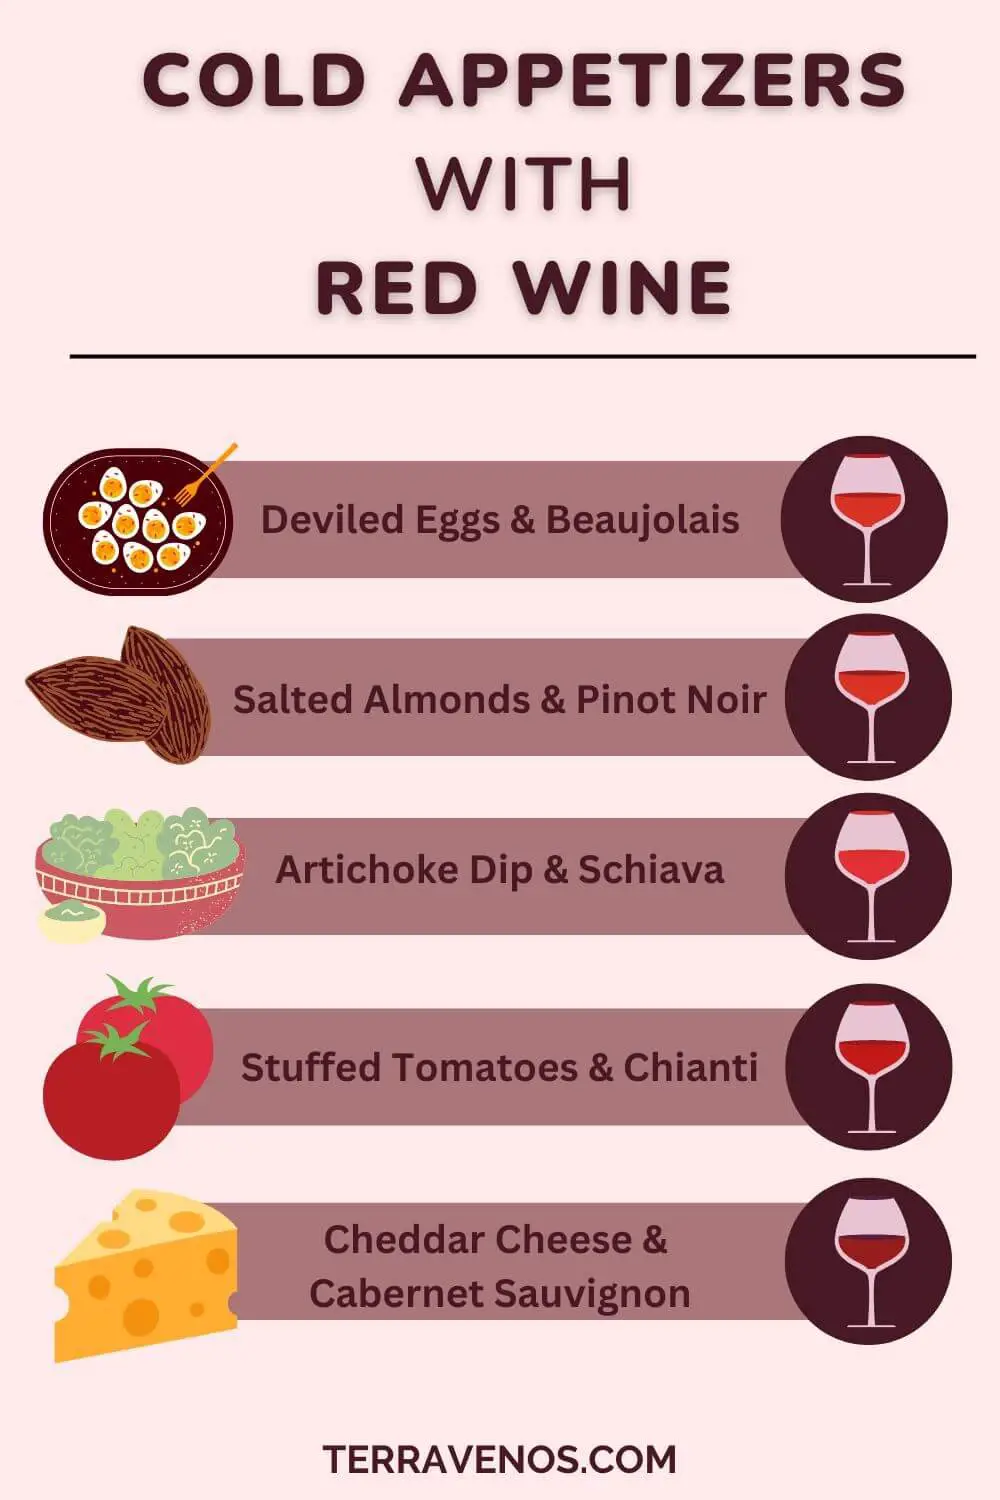 cold appetizers for red wine - infographic